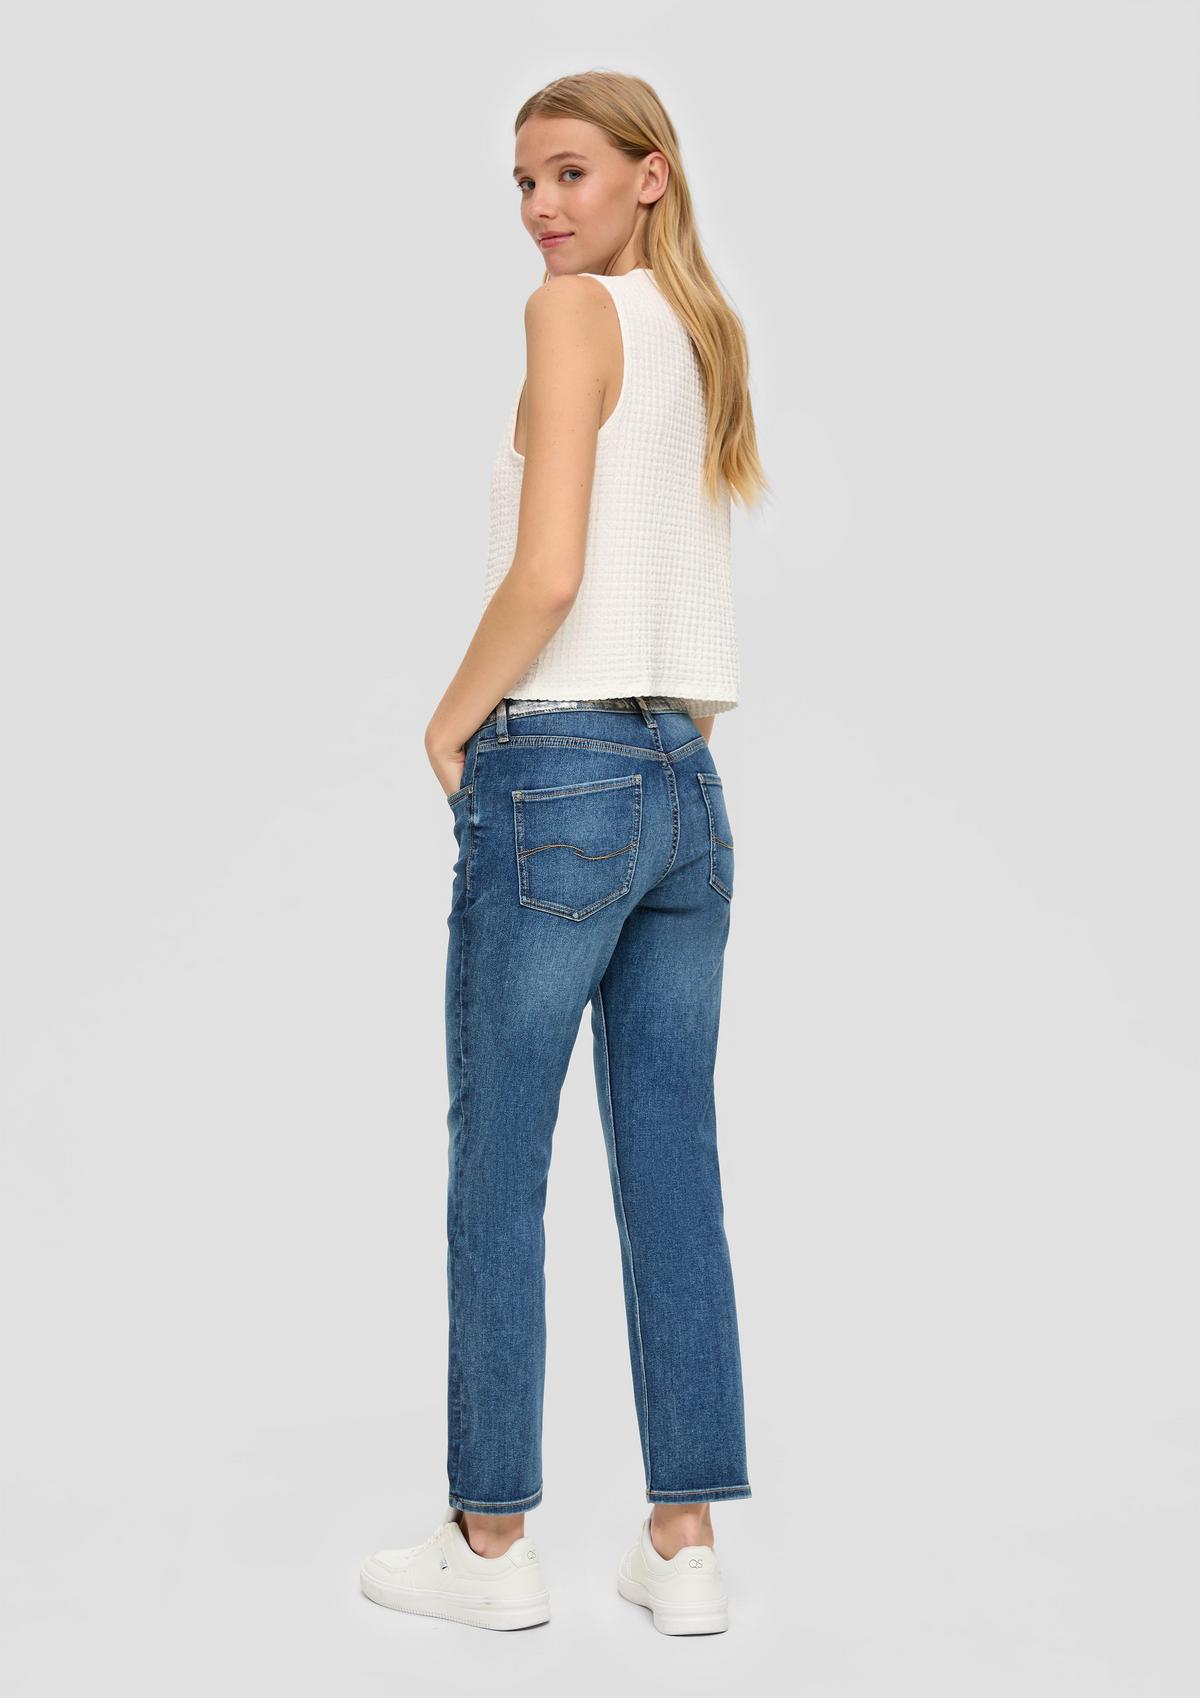 s.Oliver Catie jeans / high rise / straight leg / foil print